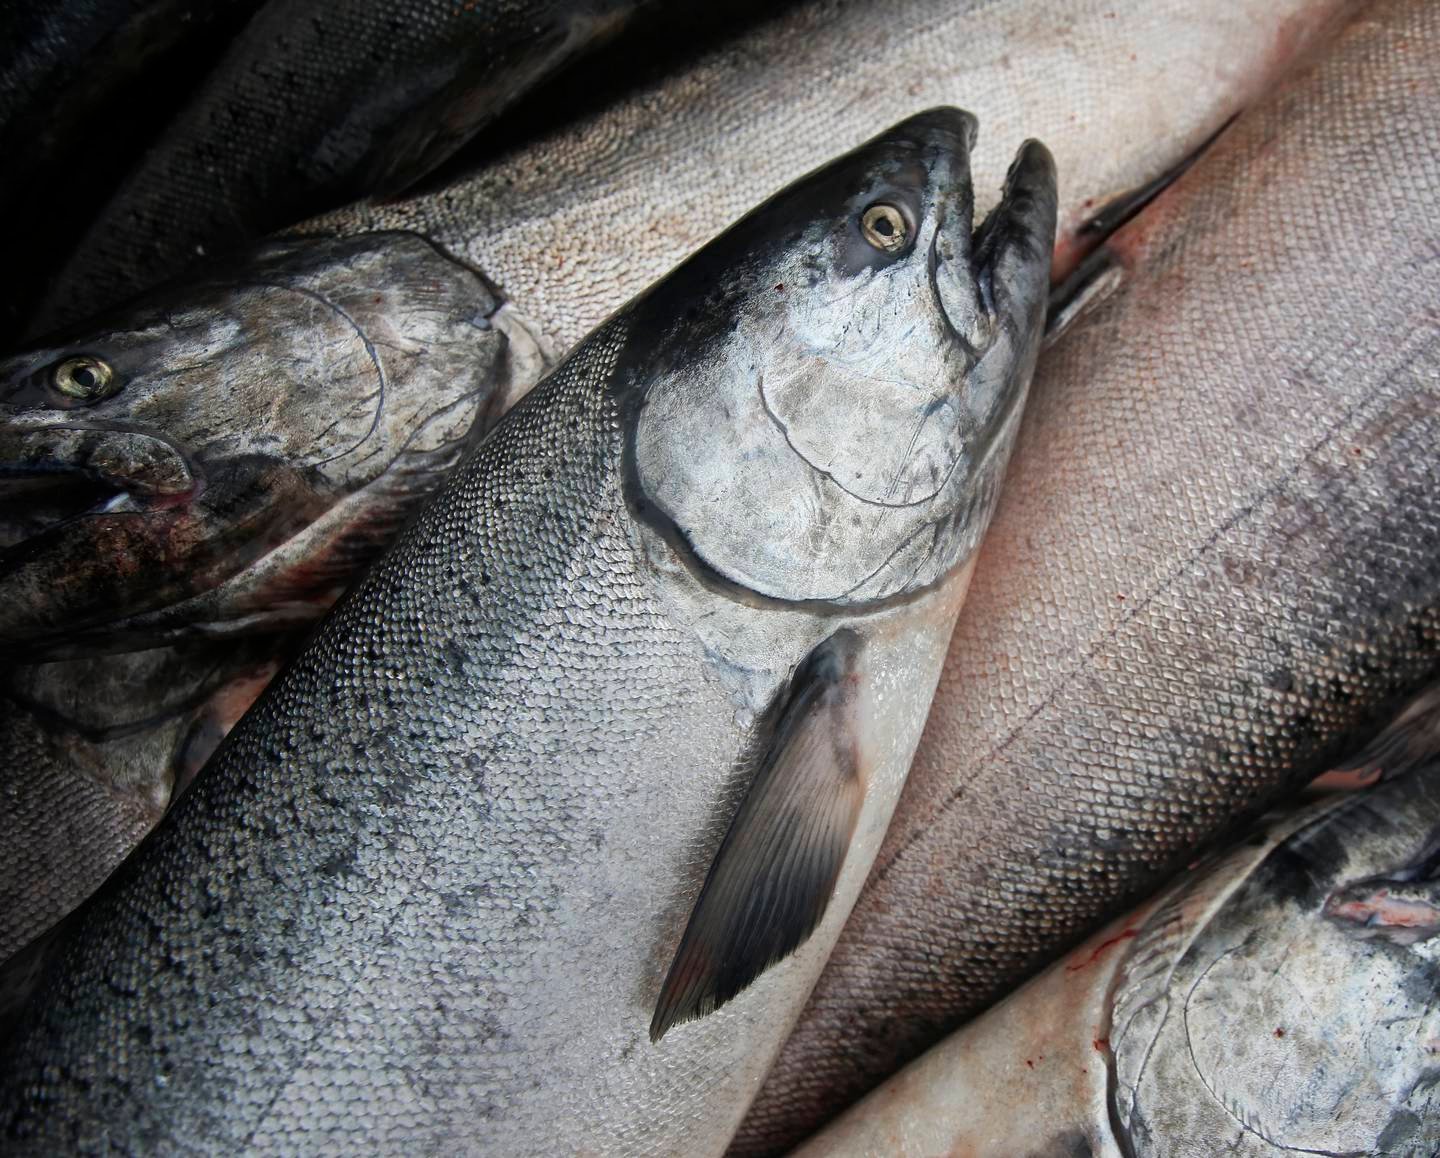 The federal agency begins a year-long review of whether to list Alaskan king salmon as an endangered species